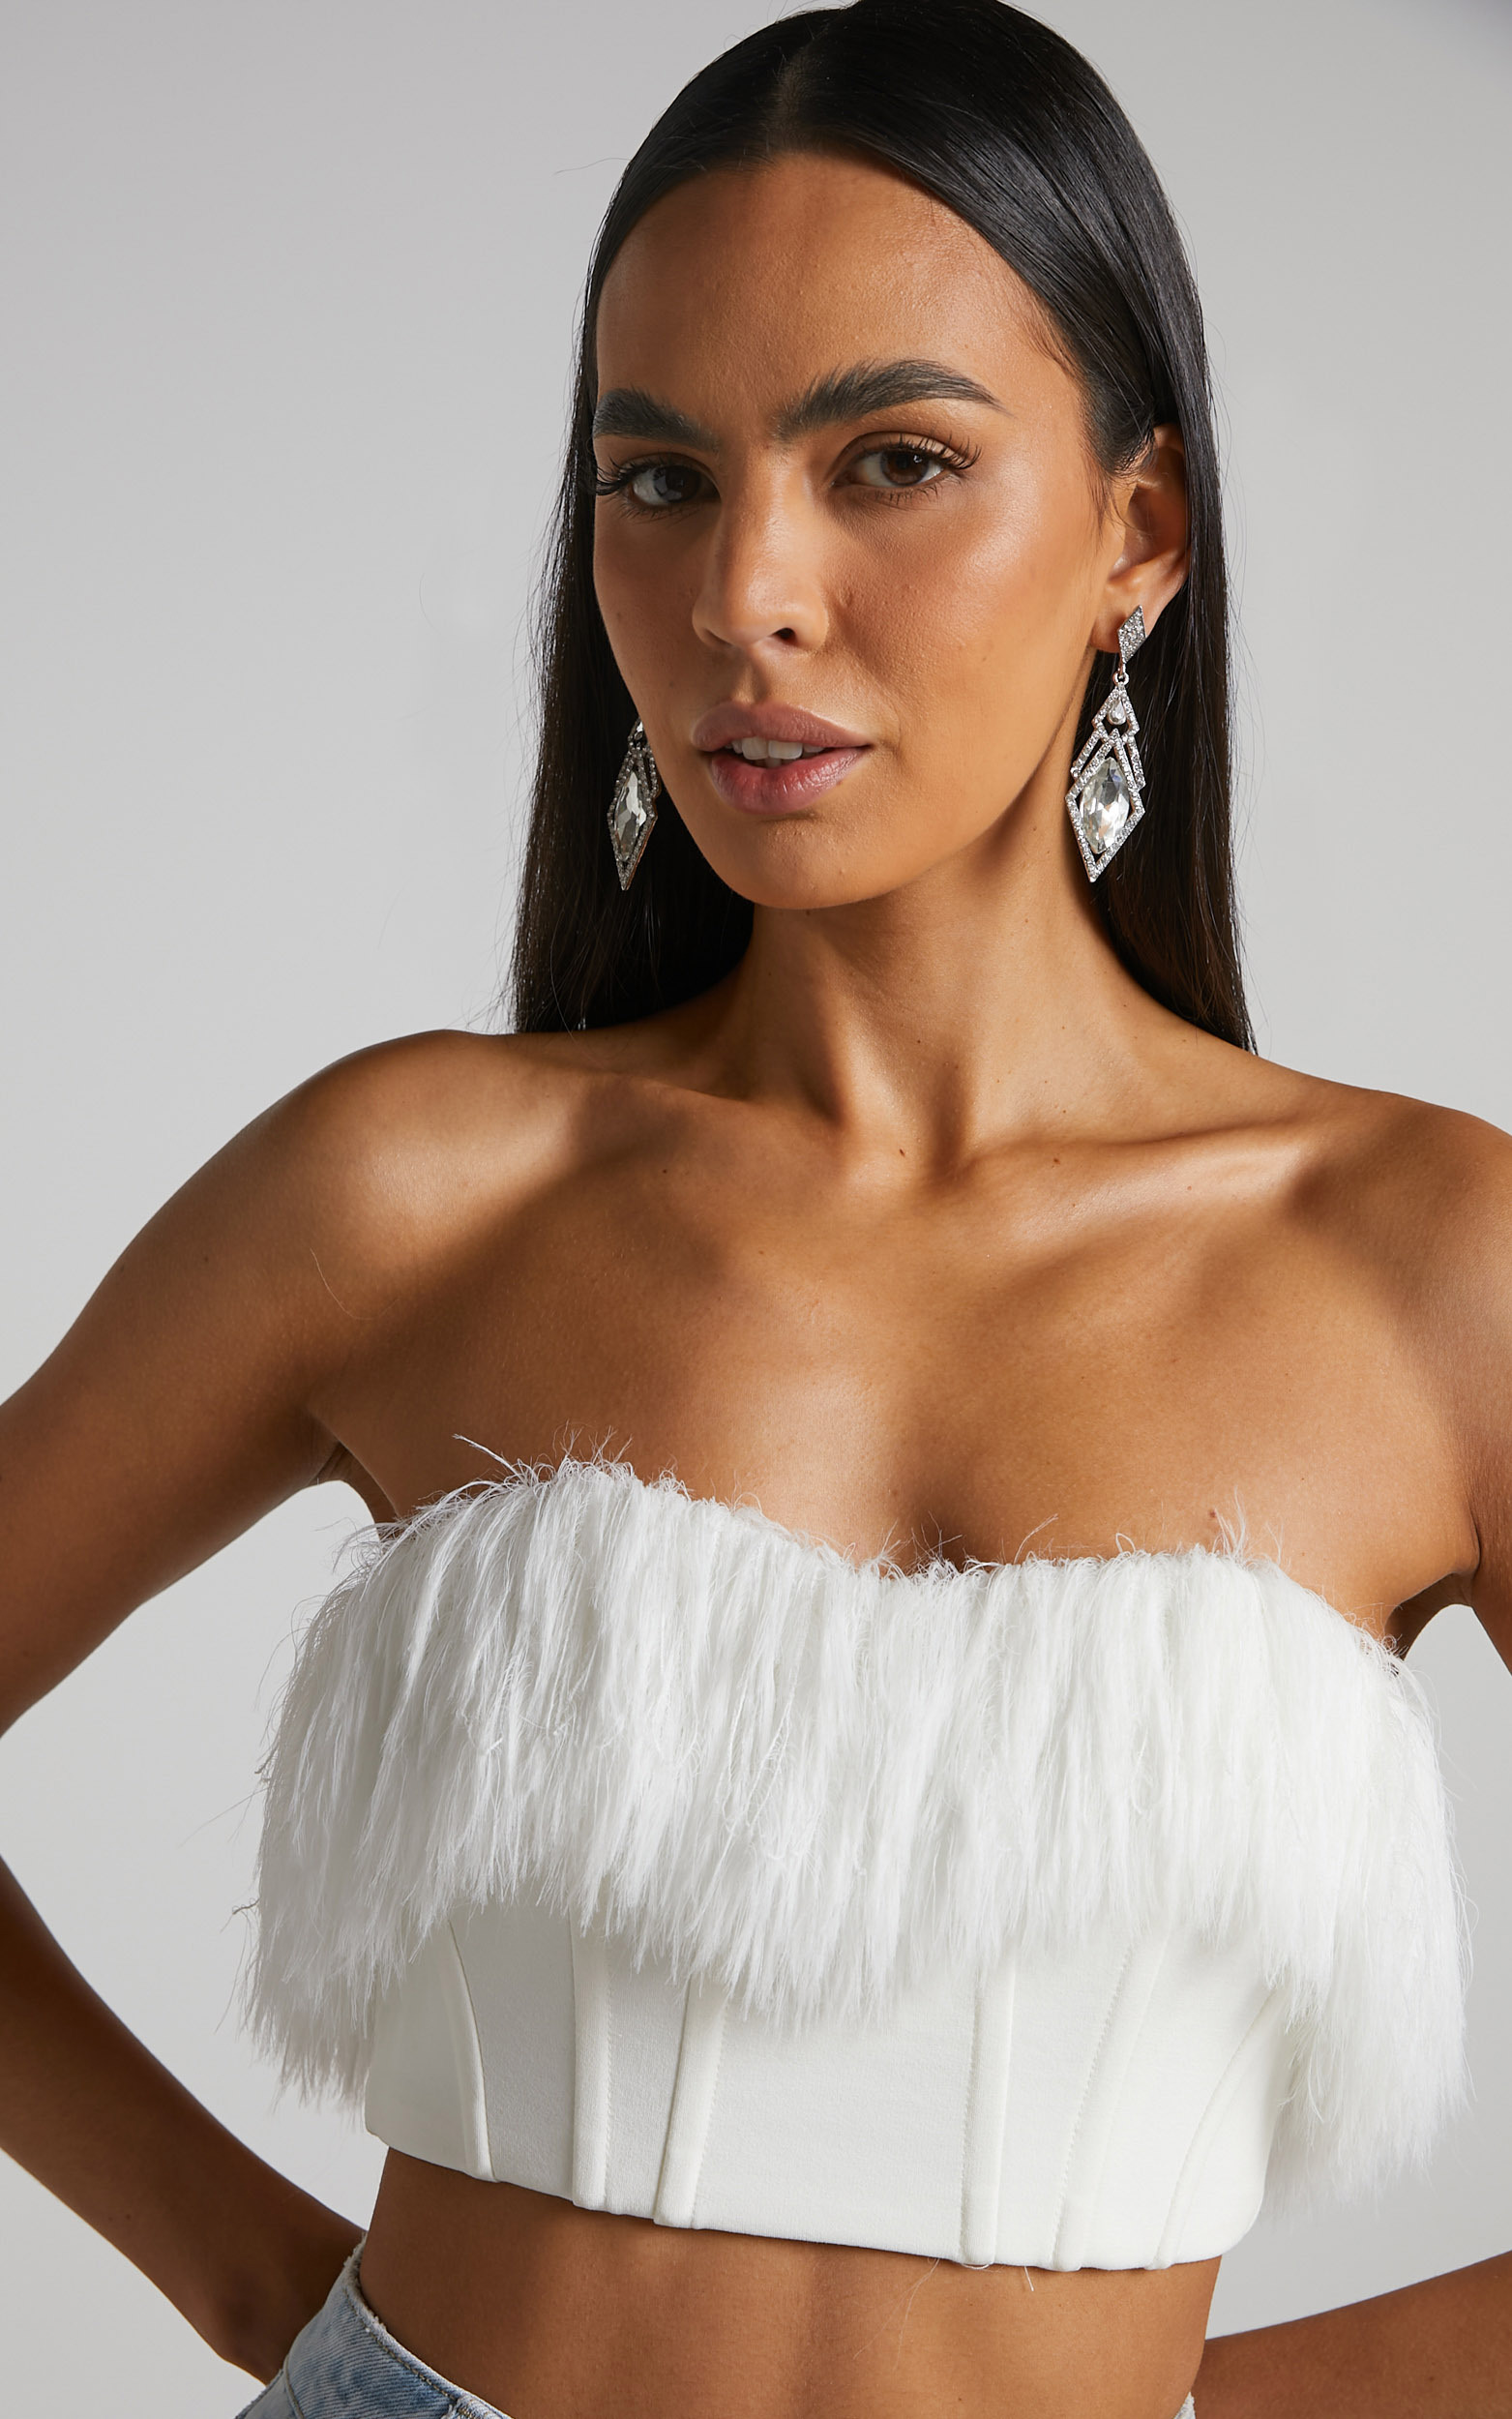 Rhaiza Top - Faux Feather Trim Strapless Sweetheart Crop Top in White - 06, WHT1, hi-res image number null